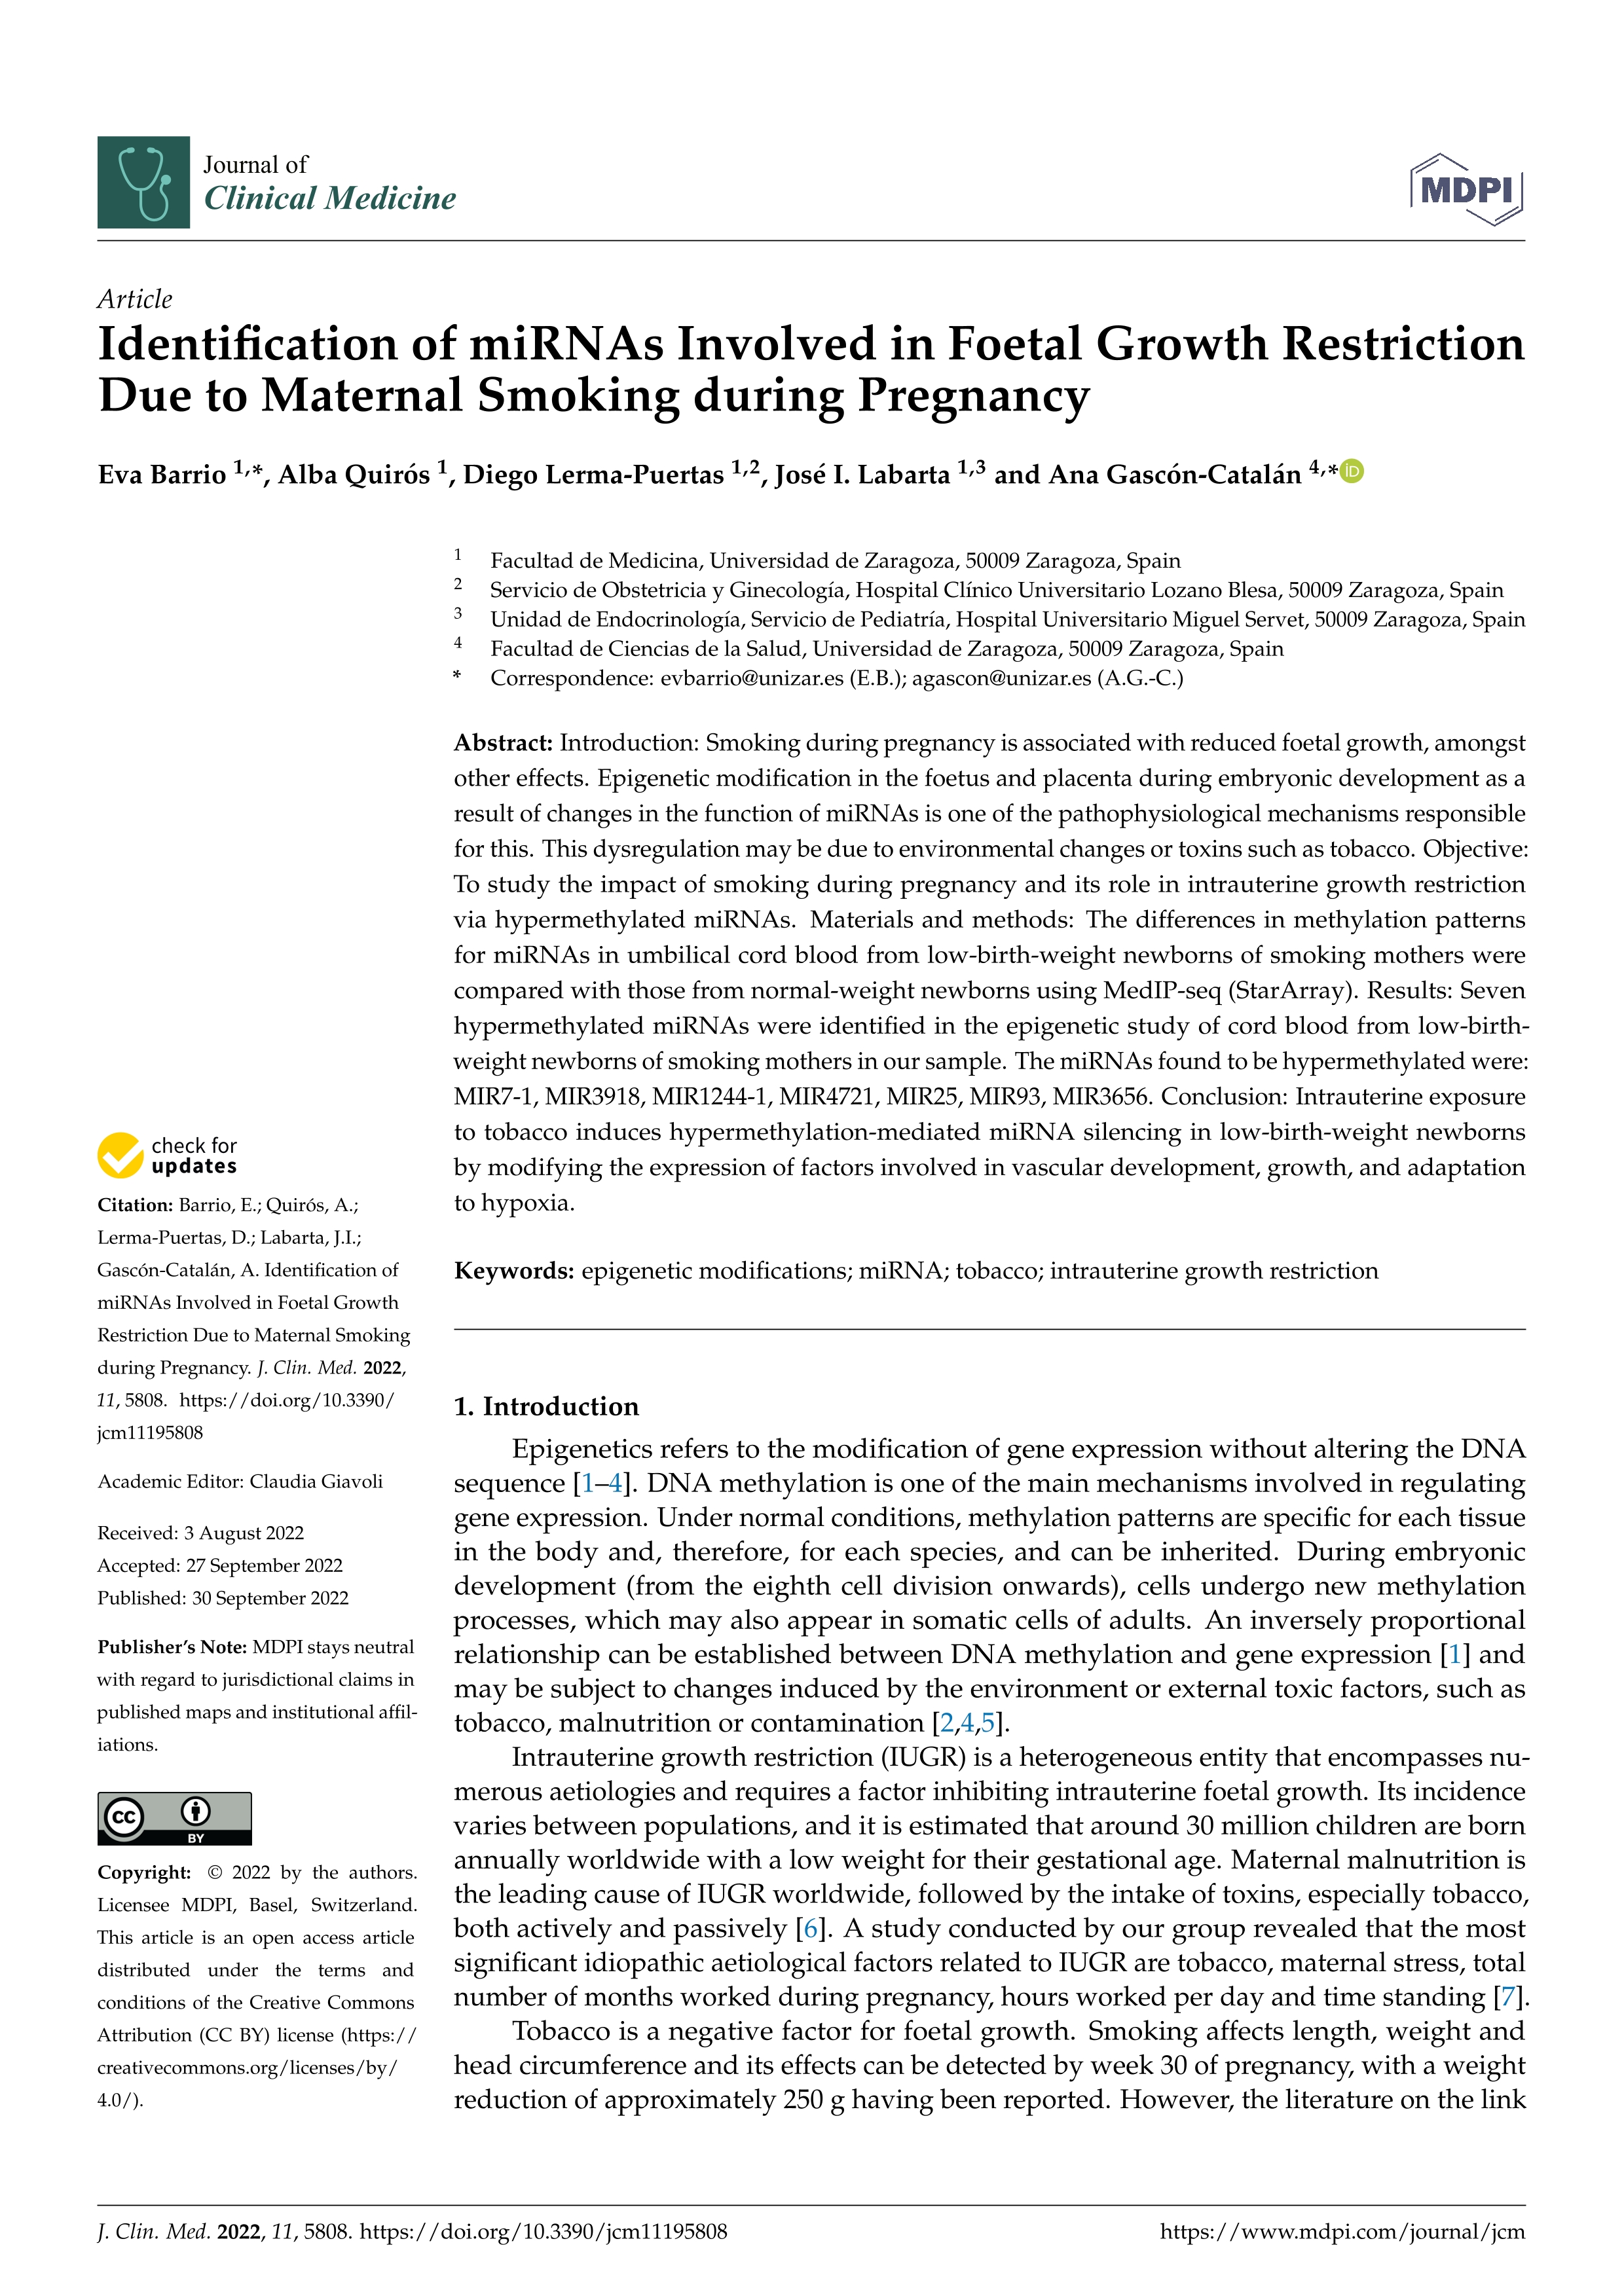 Identification of miRNAs involved in foetal growth restriction due to maternal smoking during pregnancy